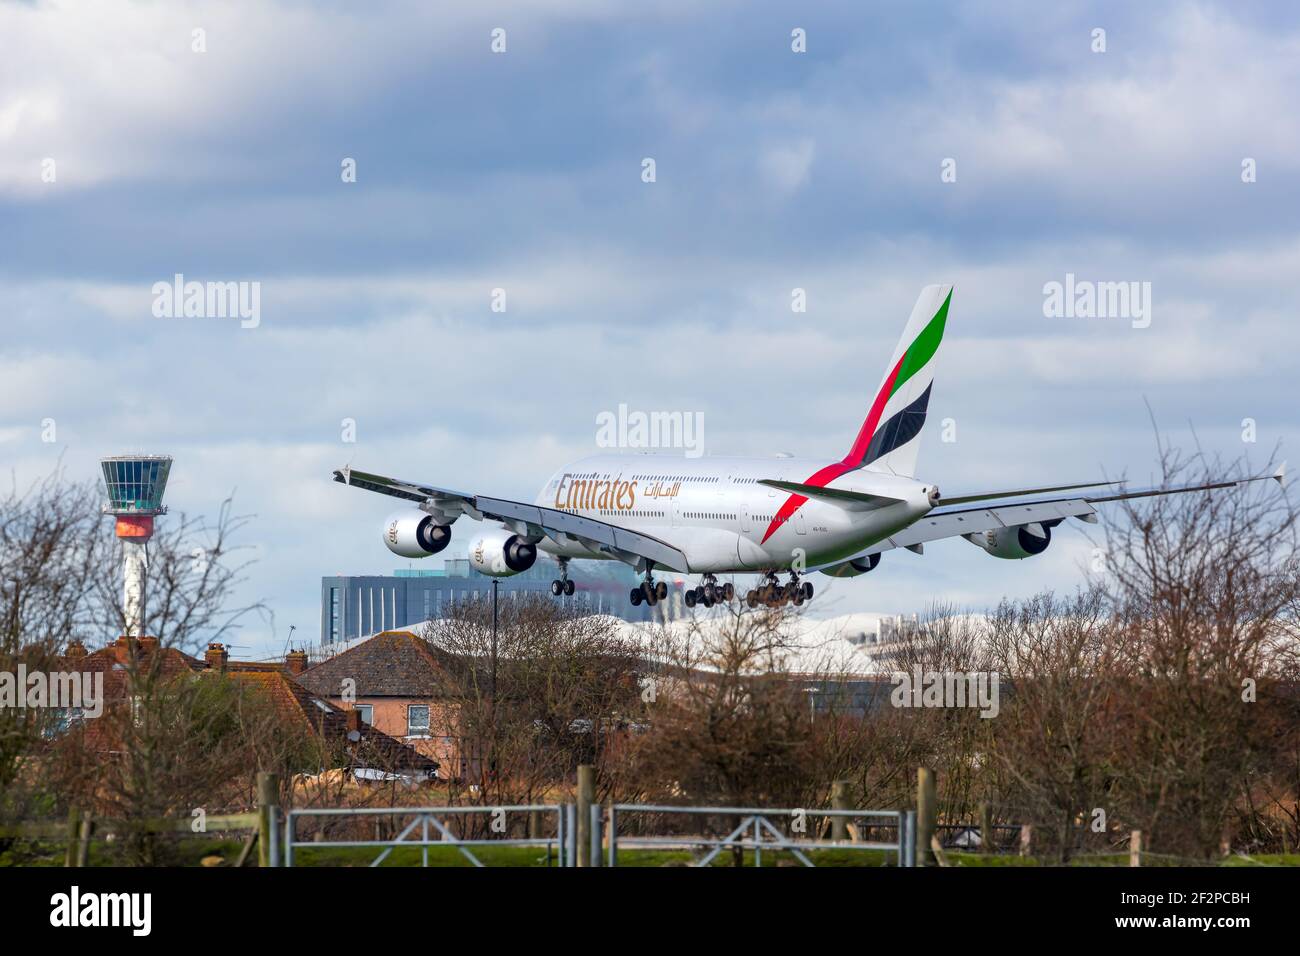 london, Heathrow Airport, March 2020 - Emirates, Double Decker Airbus A380 flying low on final approach, right over residential houses. image Abdul Qu Stock Photo